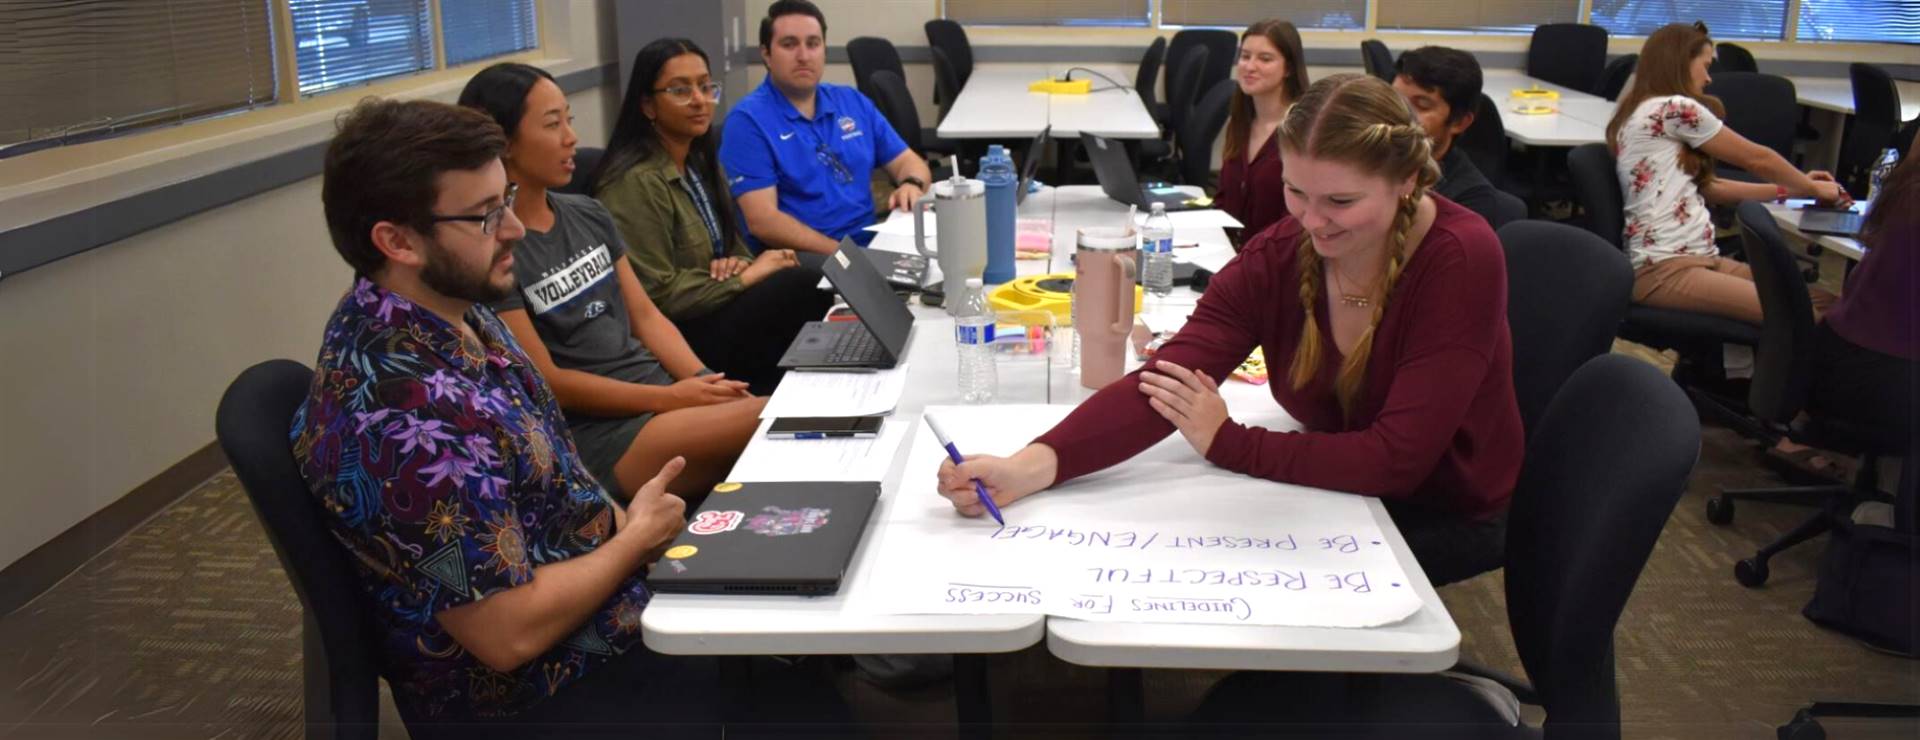 A team sitting at a table composing a "Guidelines for Success" poster.